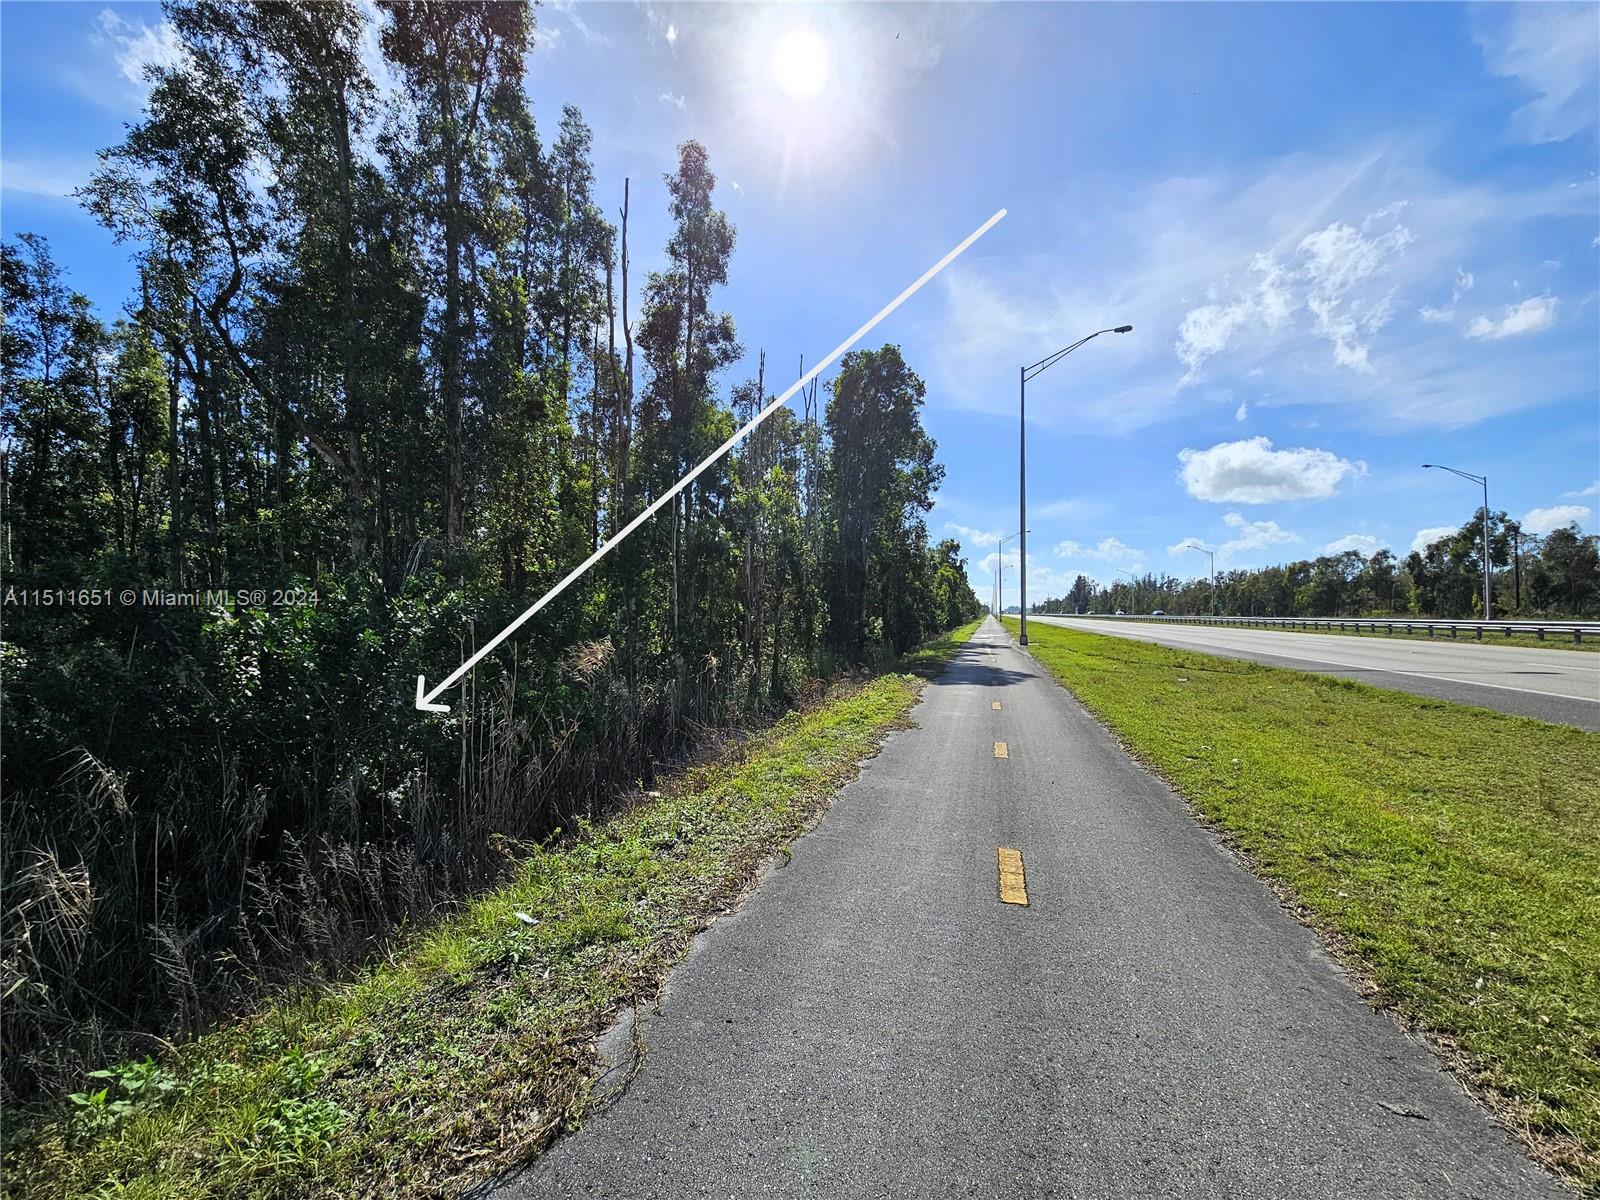 Photo of SW KROME AVE., Kendall, FL 33185